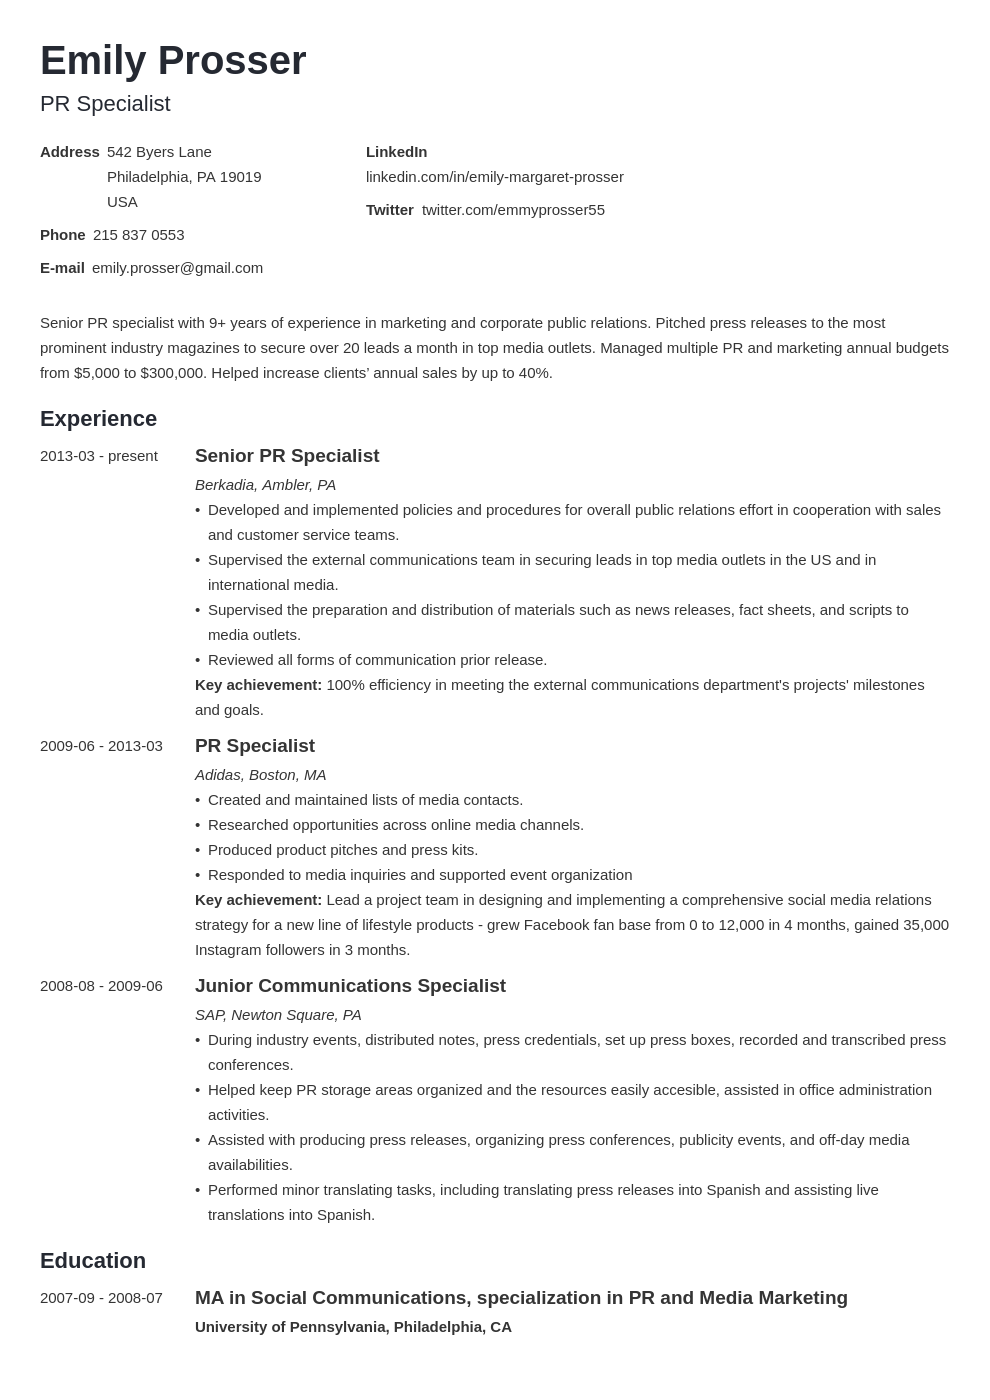 google's resume examples and writing guides